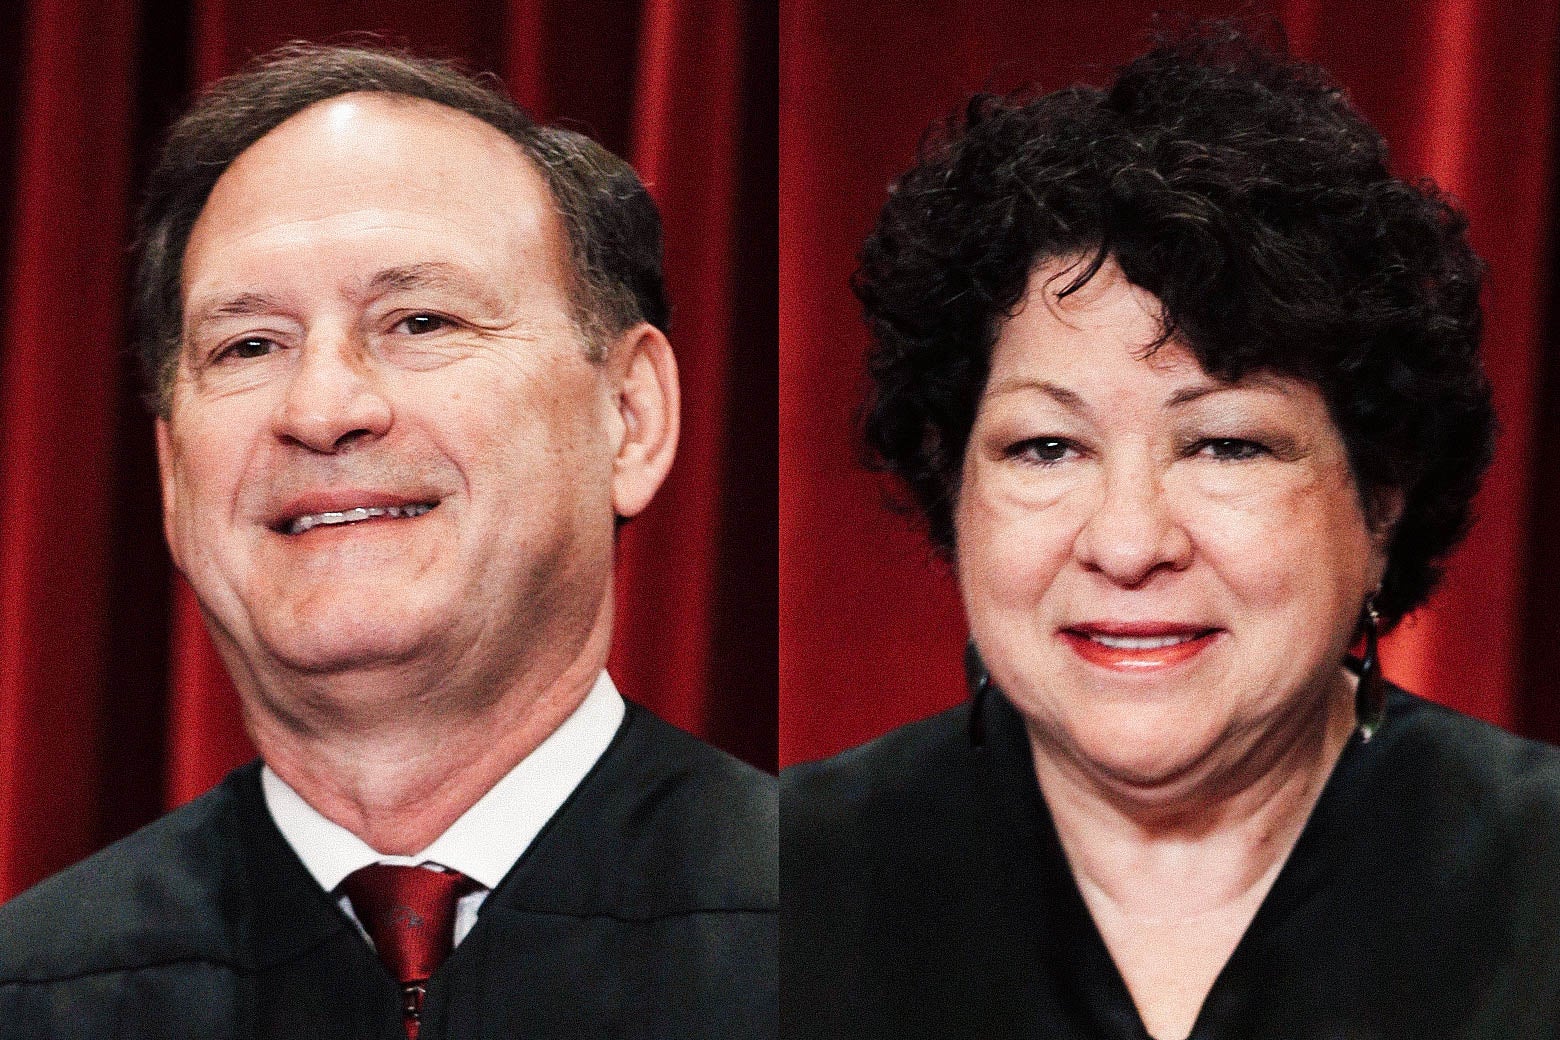 Supreme Court Associate Justices Samuel Alito and Sonia Sotomayor.